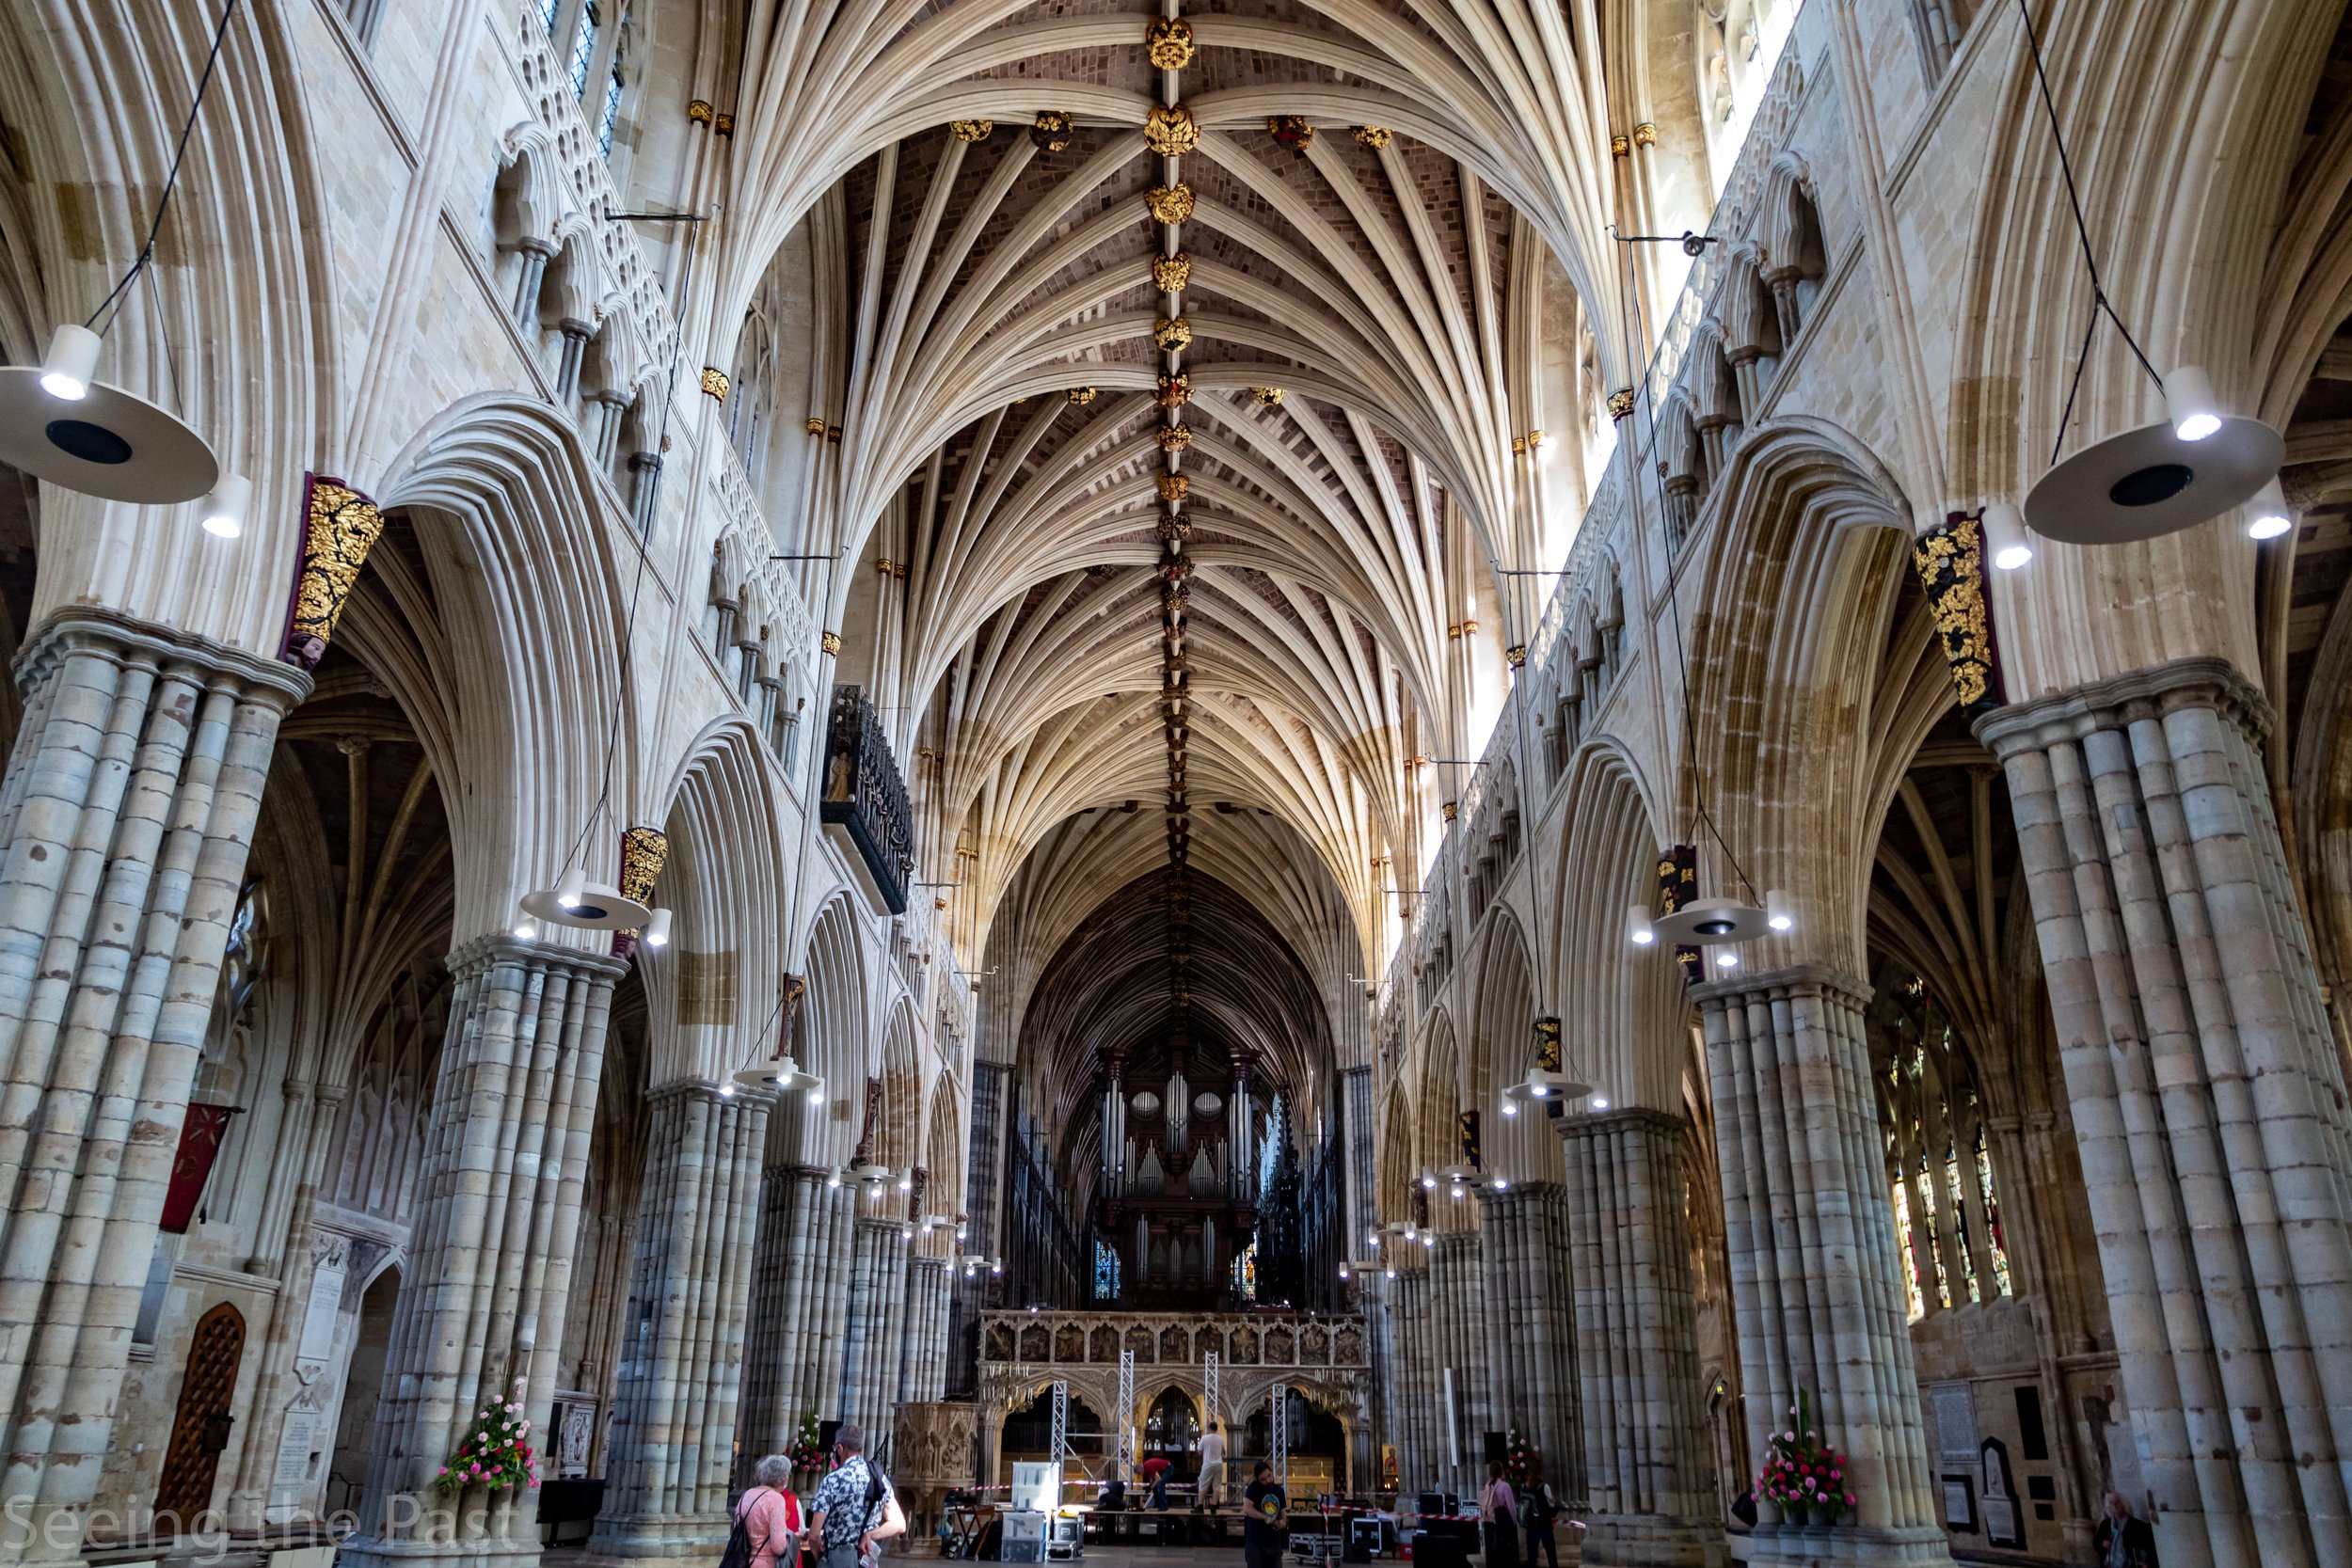 he equivocado fuga de la prisión Jugar con Exeter Cathedral; acknowledged as the most complete example of "Decorated  Gothic" architecture with the longest continuous medieval stone vault in  the world with stunning "bosses". — Seeing the past